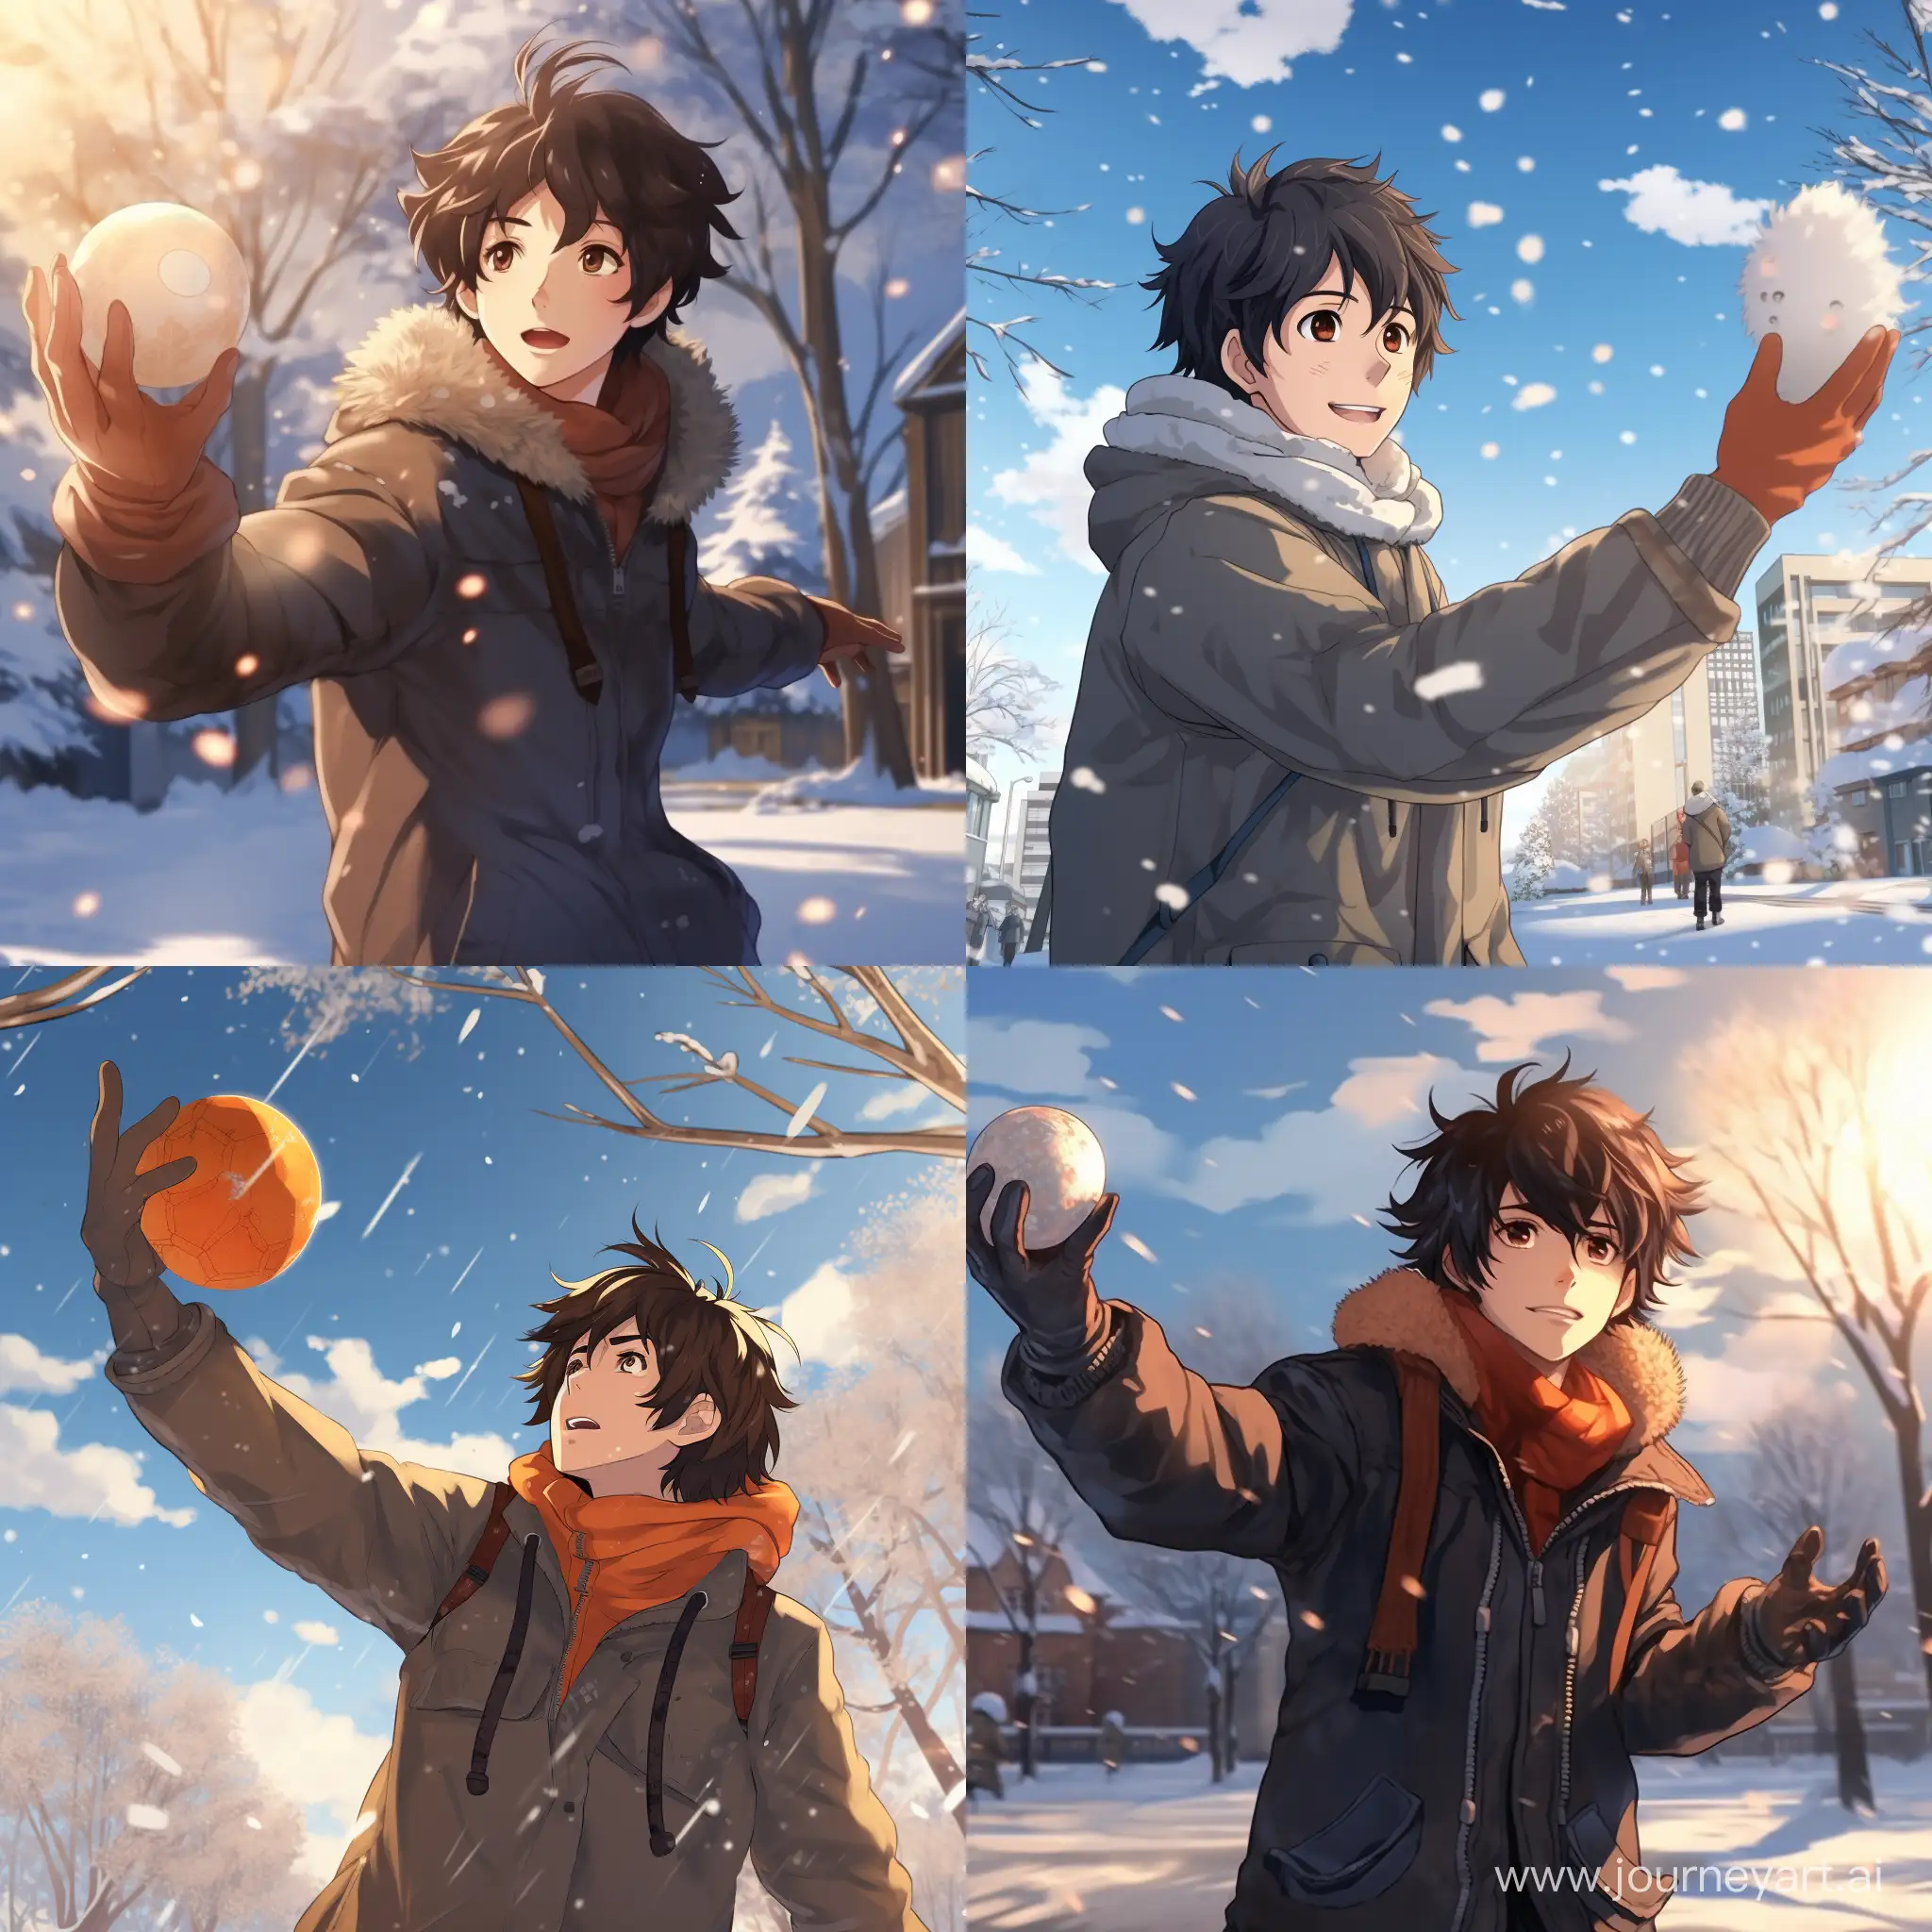 Man-Throwing-Snowball-in-Anime-Style